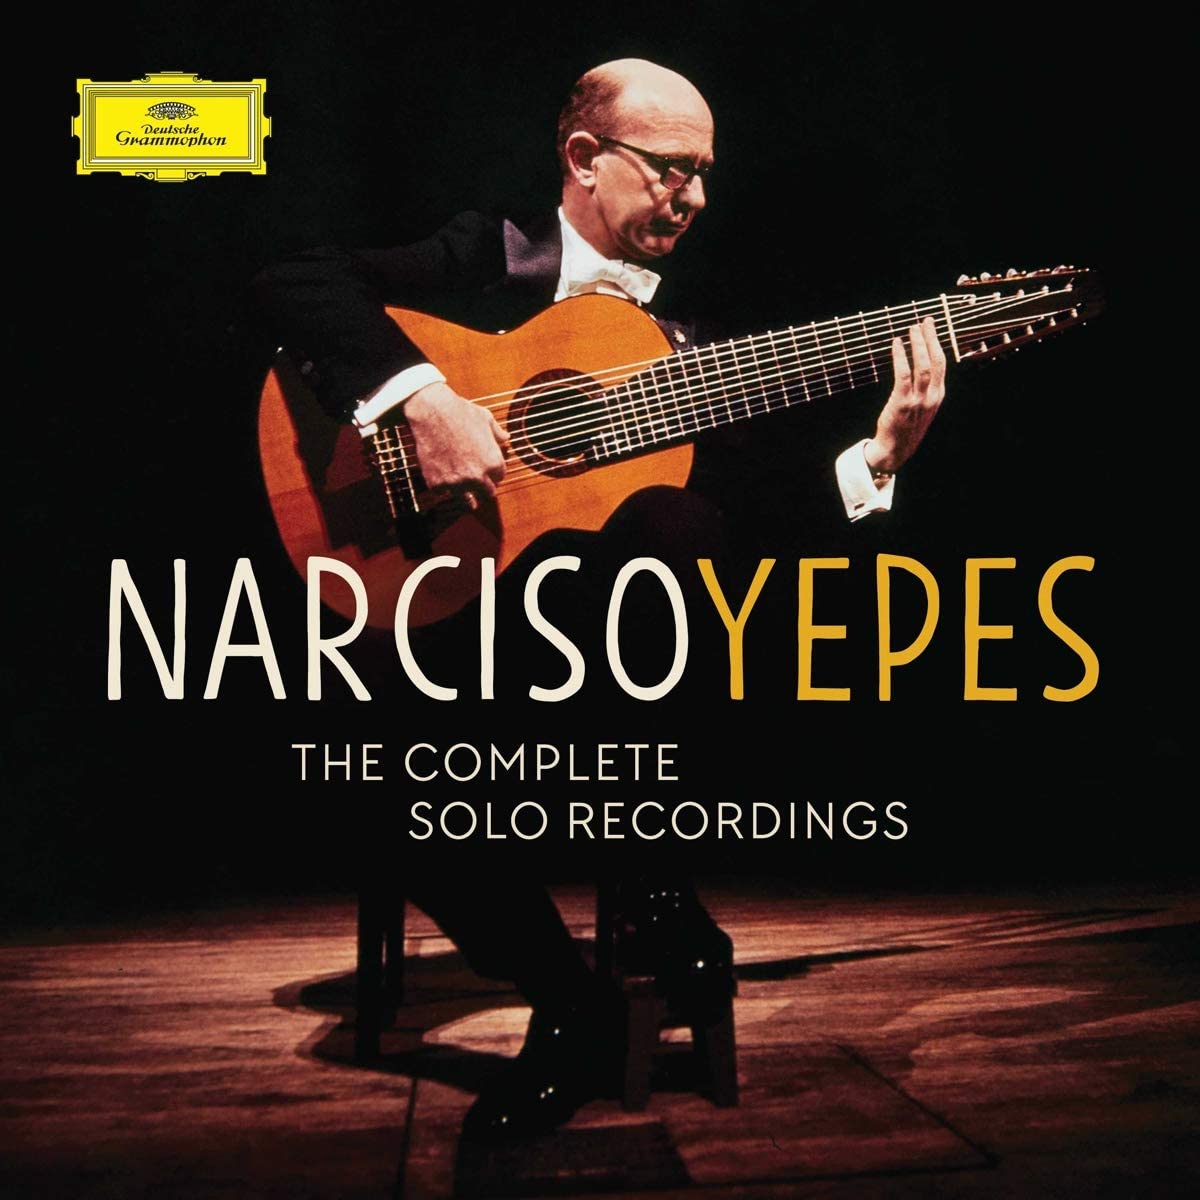 The Complete Solo Recordings | Narciso Yepes, Various Composers carturesti.ro poza noua